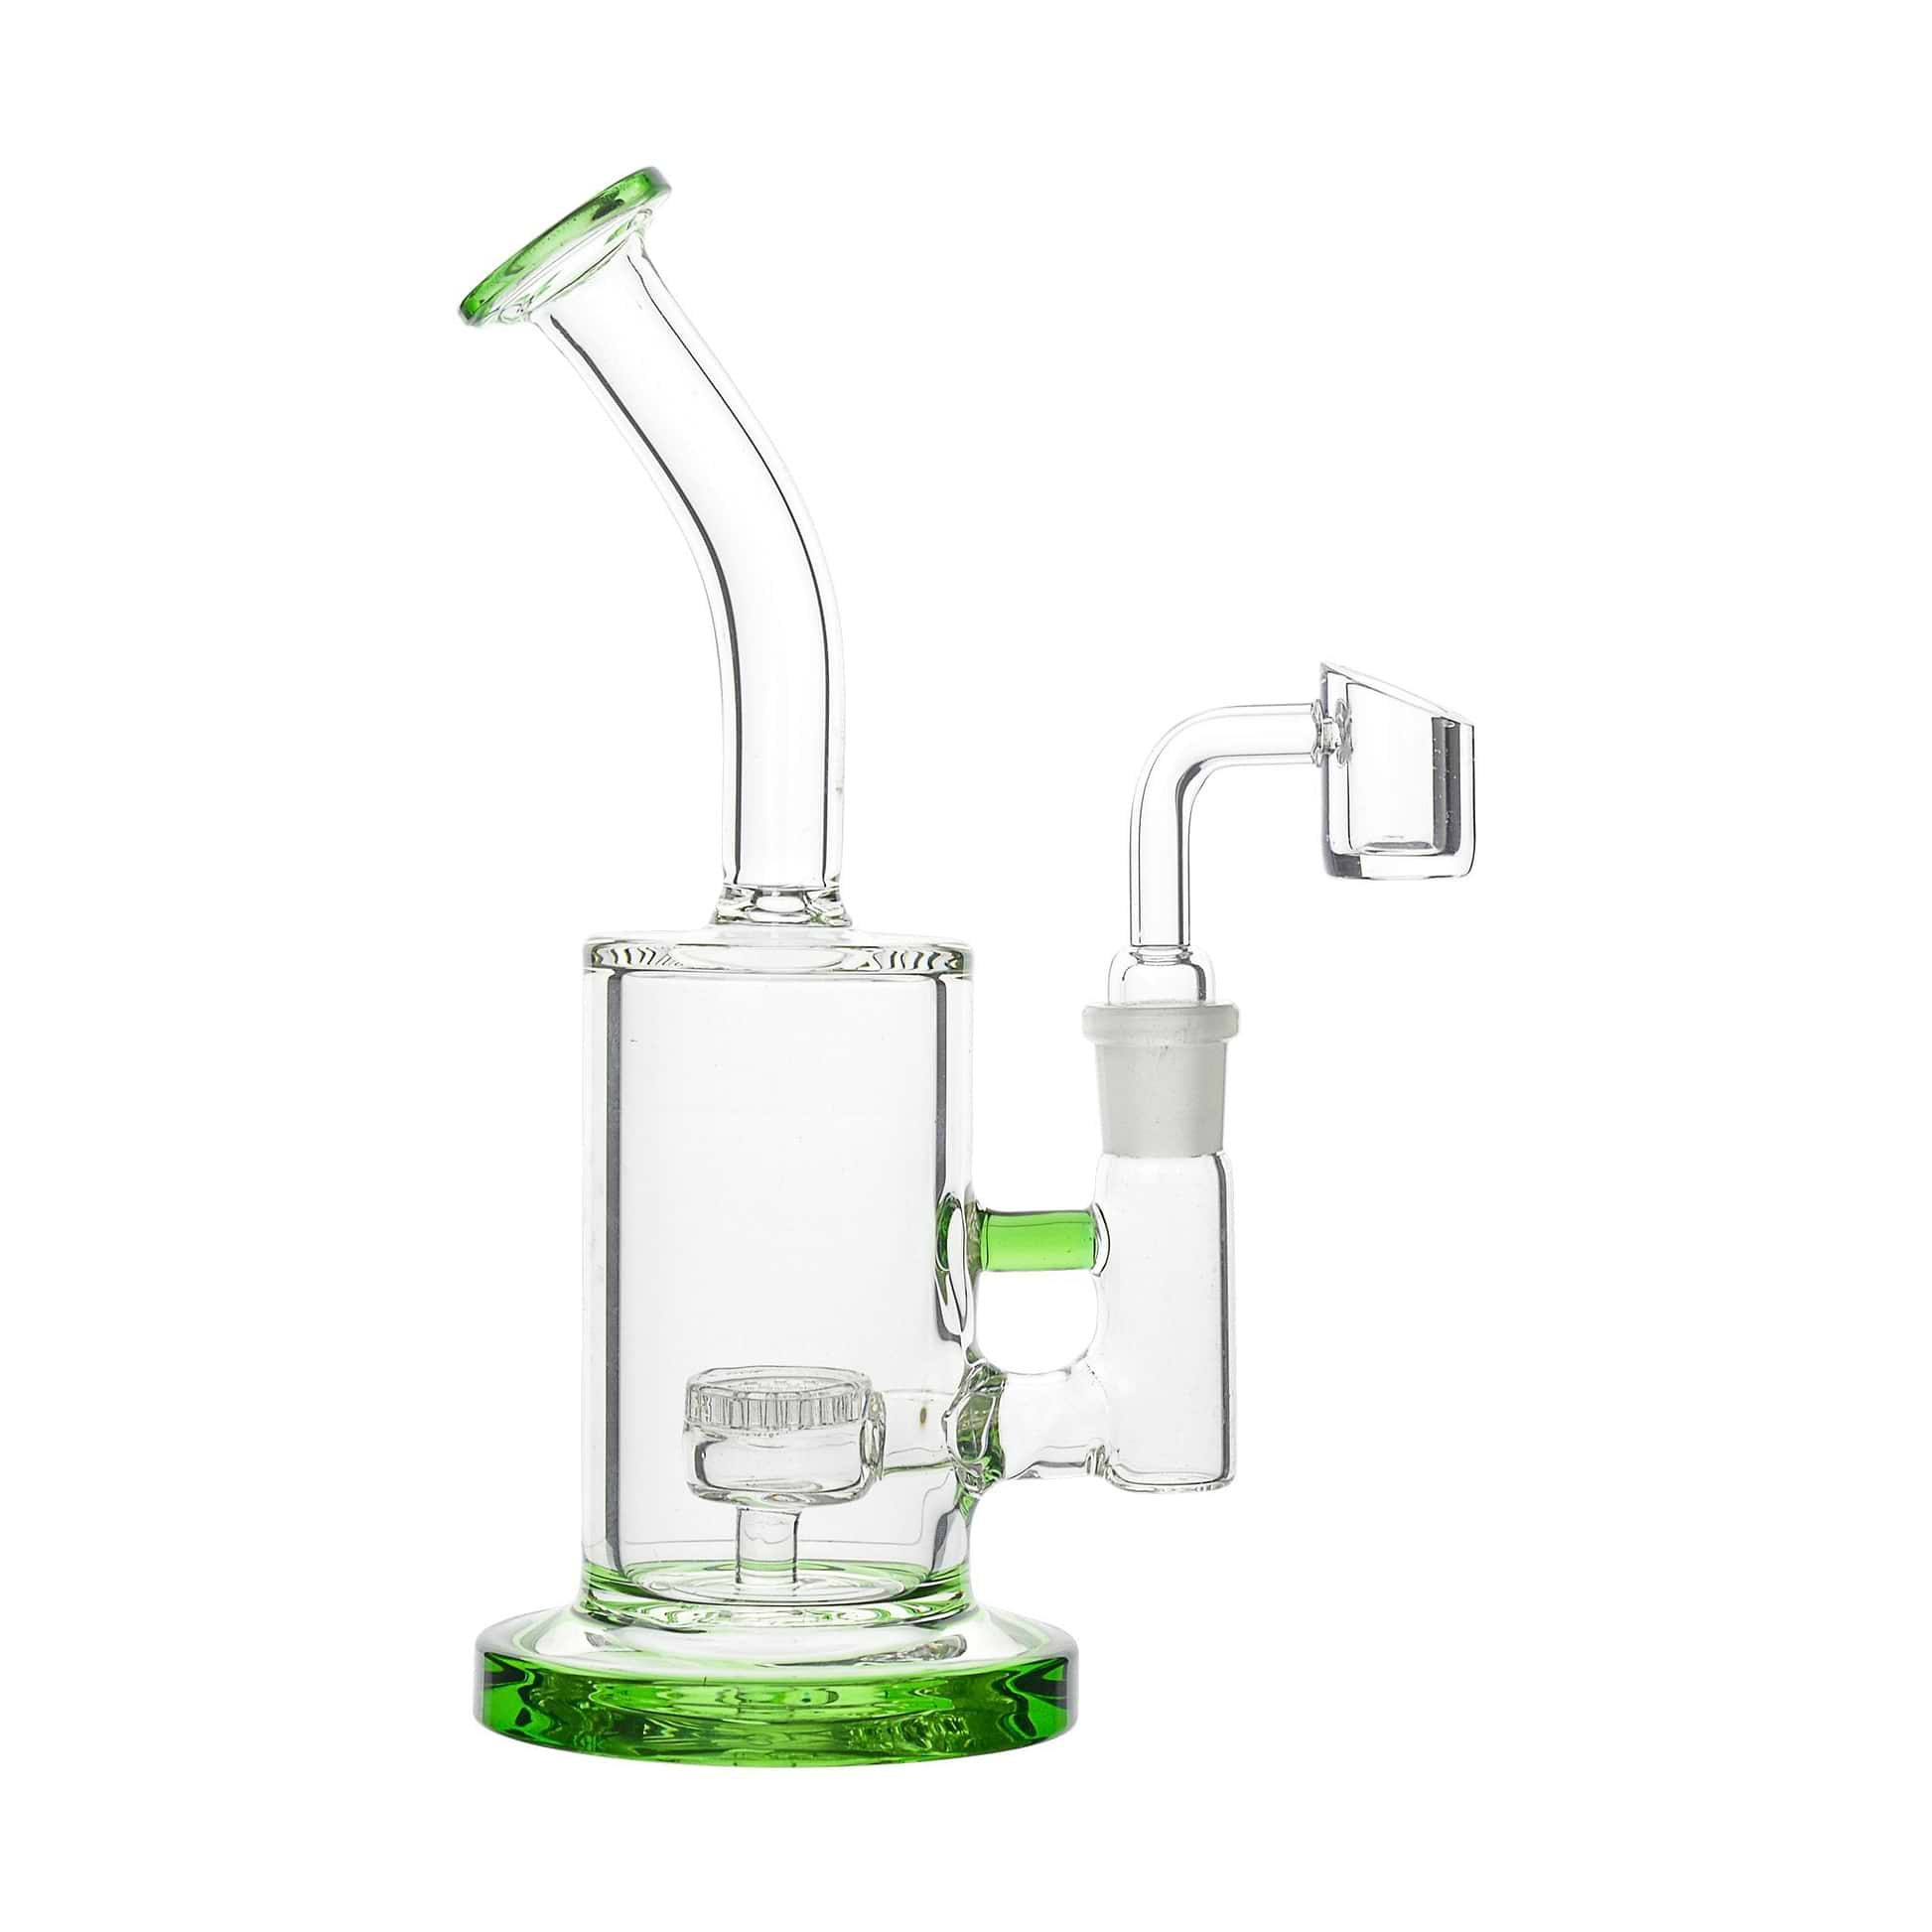 Full shot 8-inch glass honeycomb dab rig smoking device green accents banger facing right mouthpiece facing left